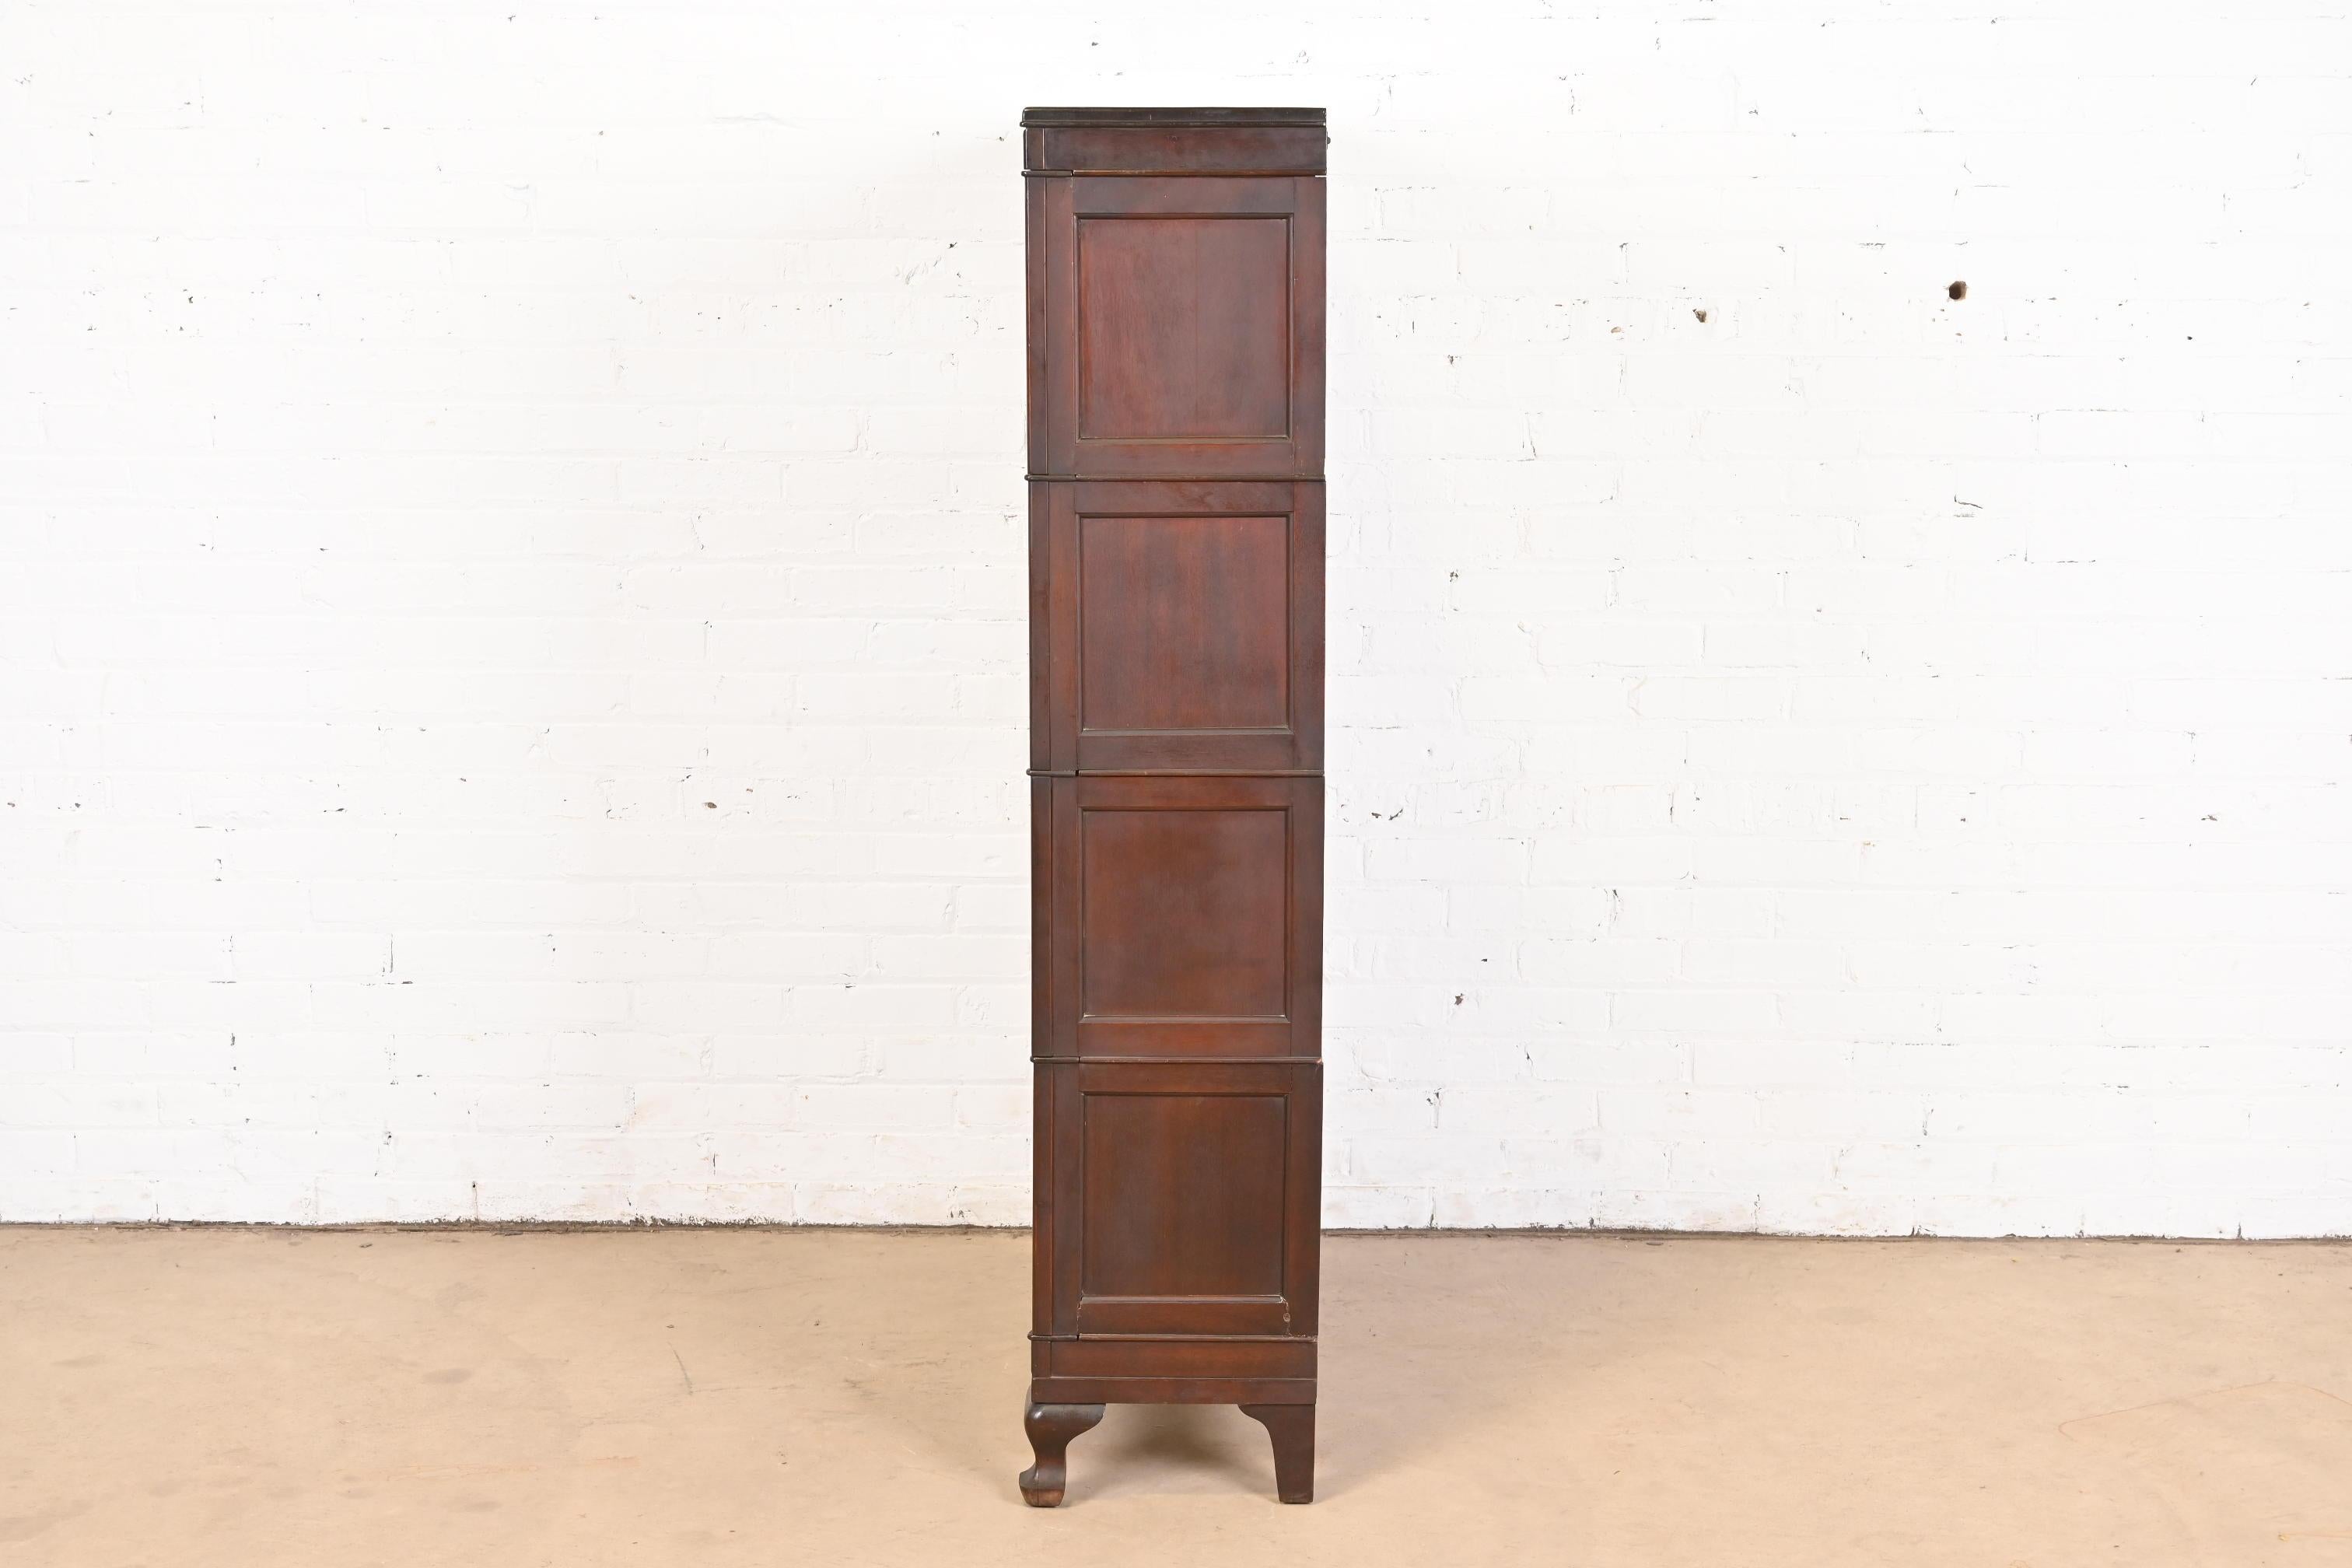 Antique Arts & Crafts Mahogany Four-Stack Barrister Bookcase by Macey, 1920s For Sale 4